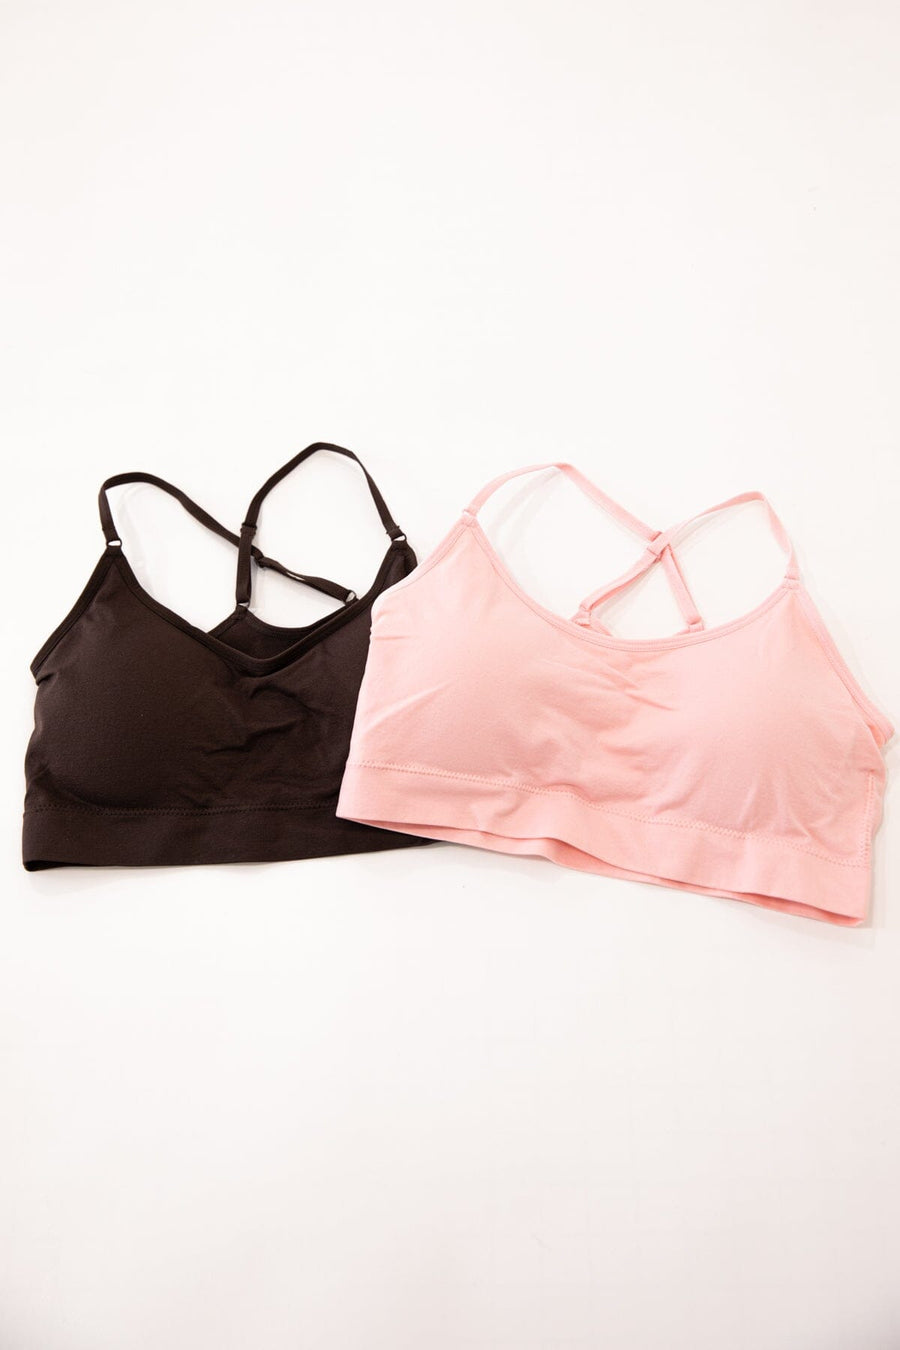 Brown and Baby Pink Padded Bralette Bundle - Filly Flair